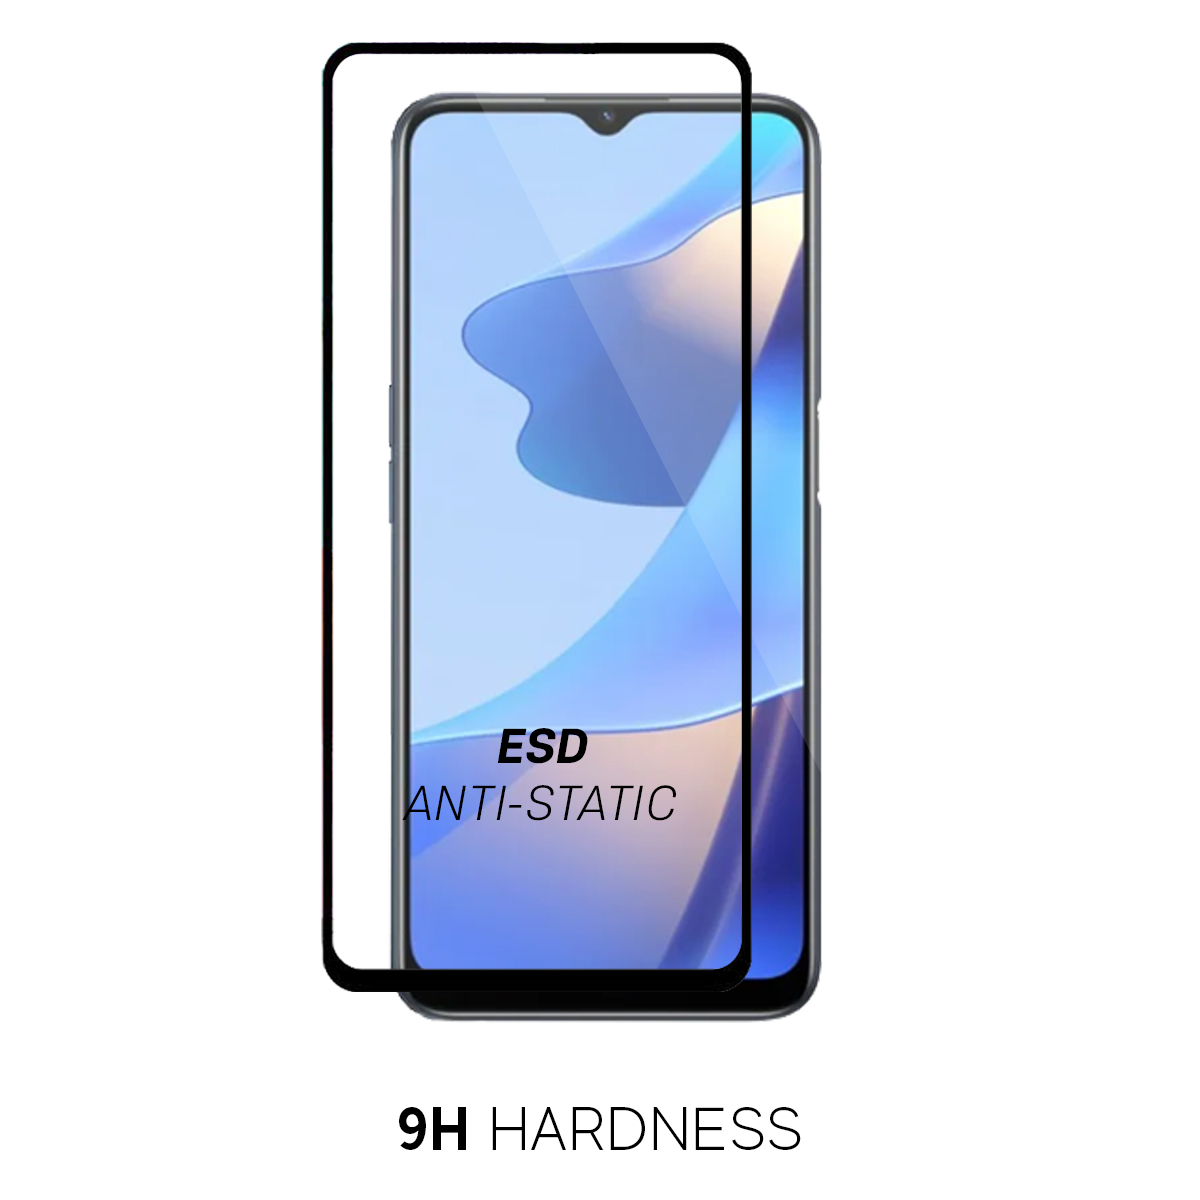 Beyox ESD Anti Static 5D Glass for Oppo A73